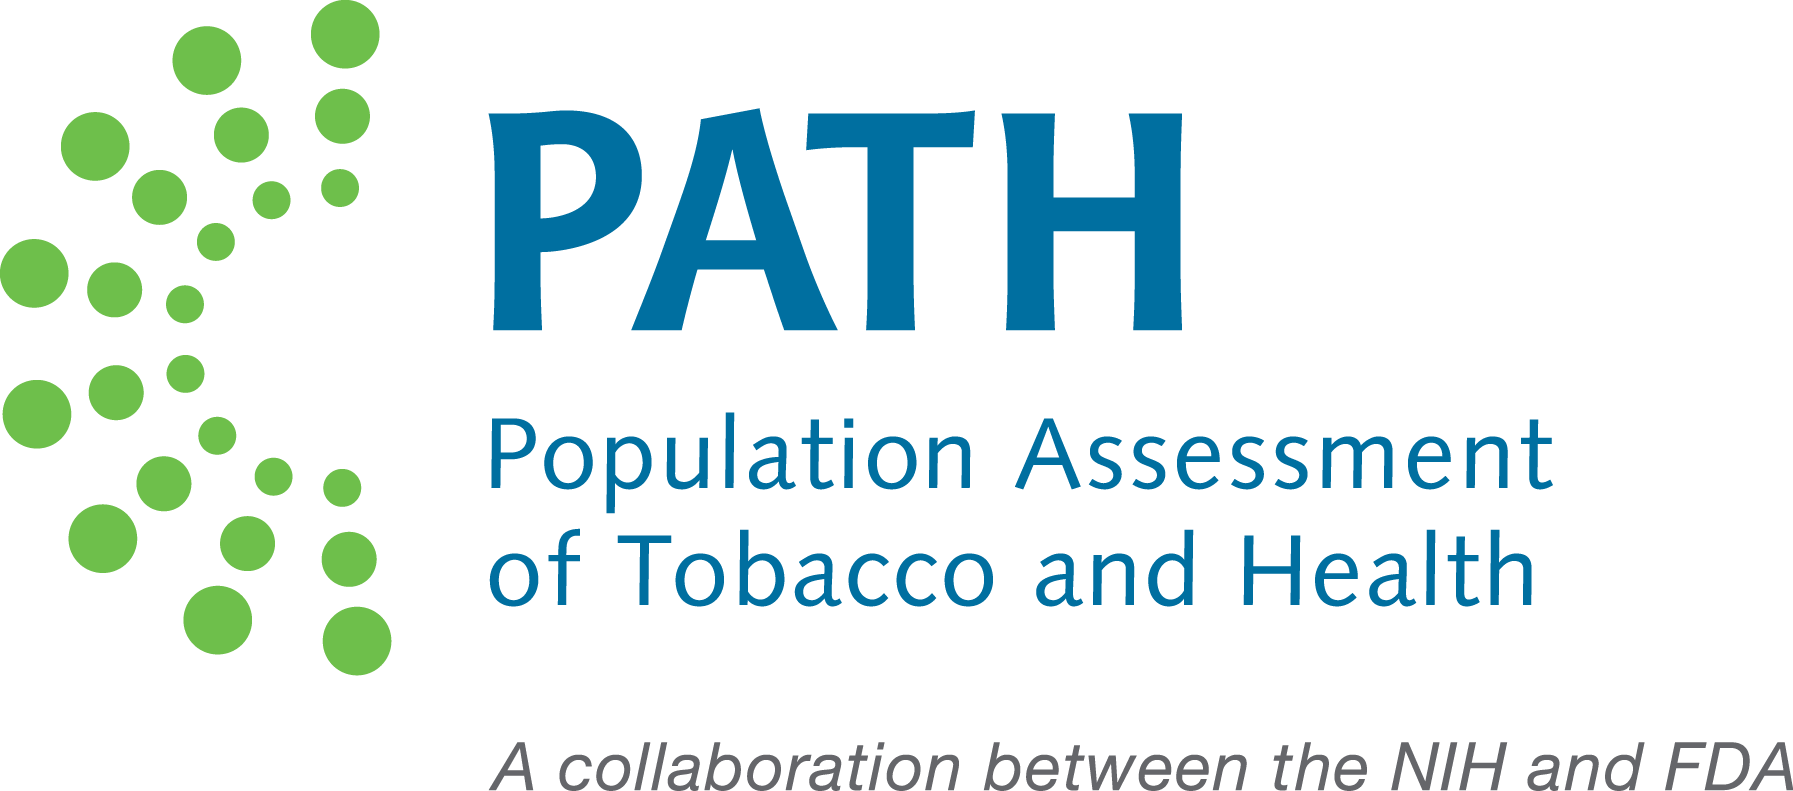 Population Assessment of Tobacco and Health